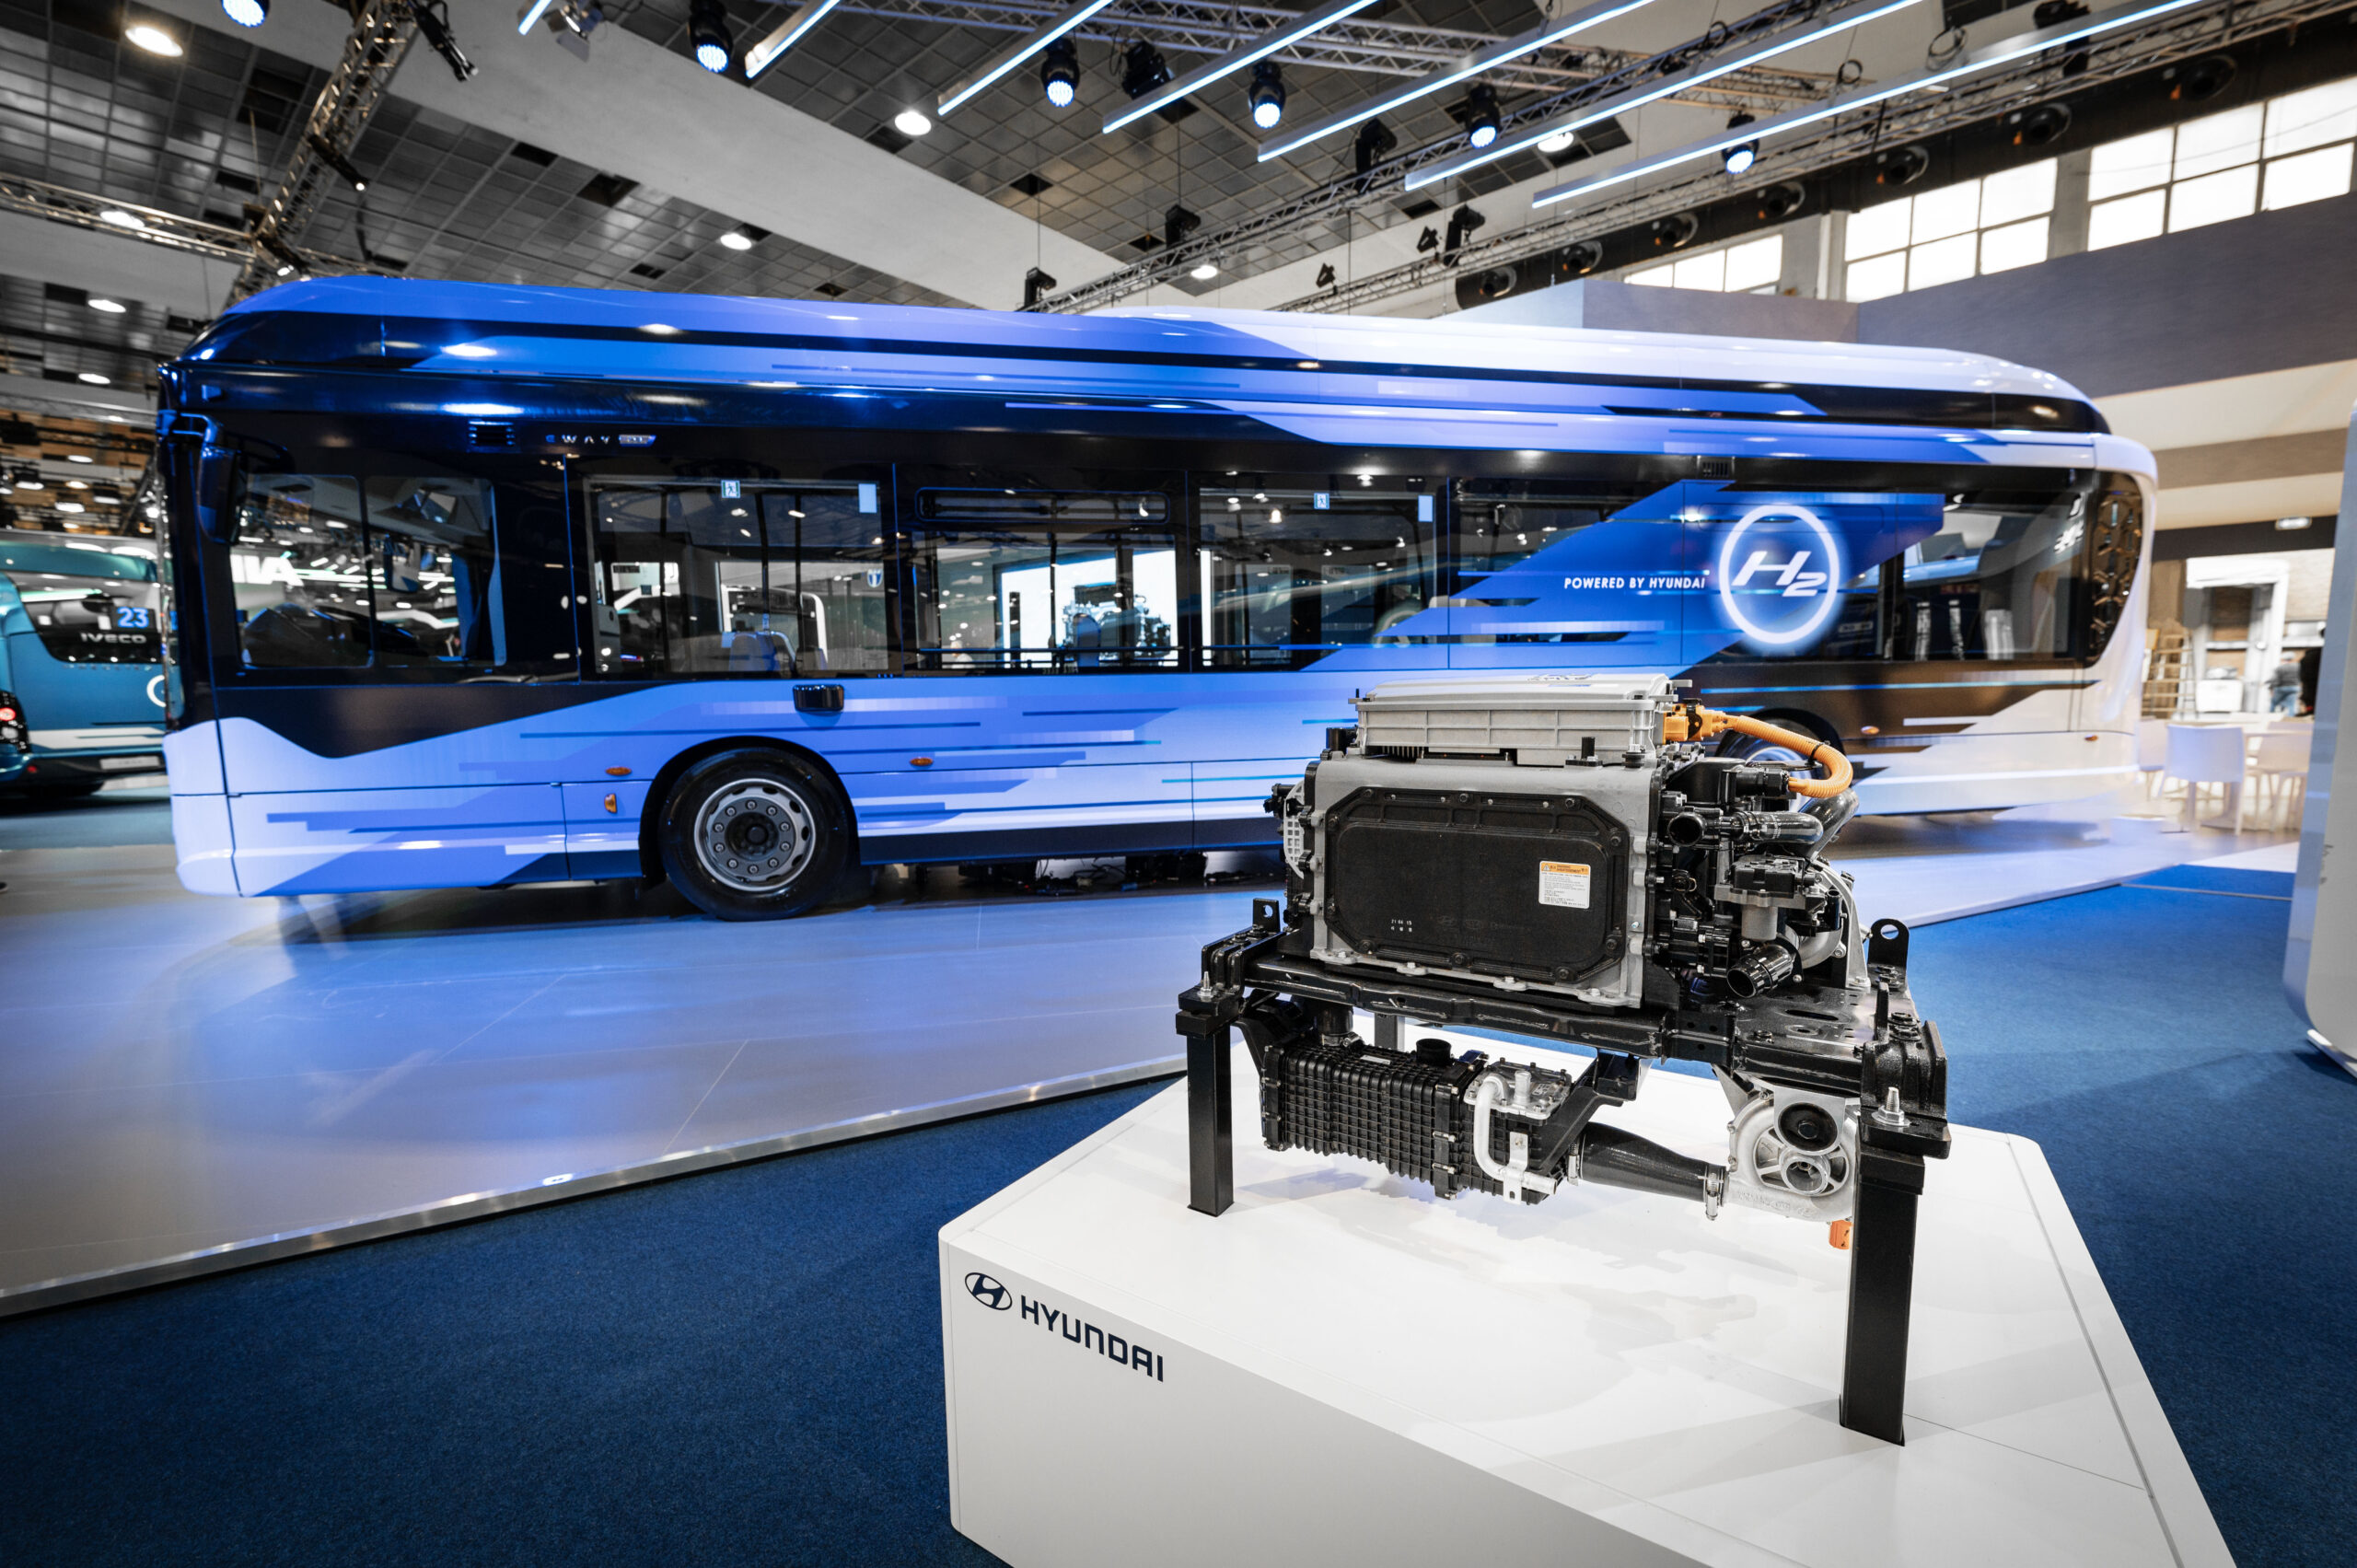 Iveco Group and Hyundai Motor Company Unveil a New Hydrogen City Bus at Busworld Trade Show in Brussels